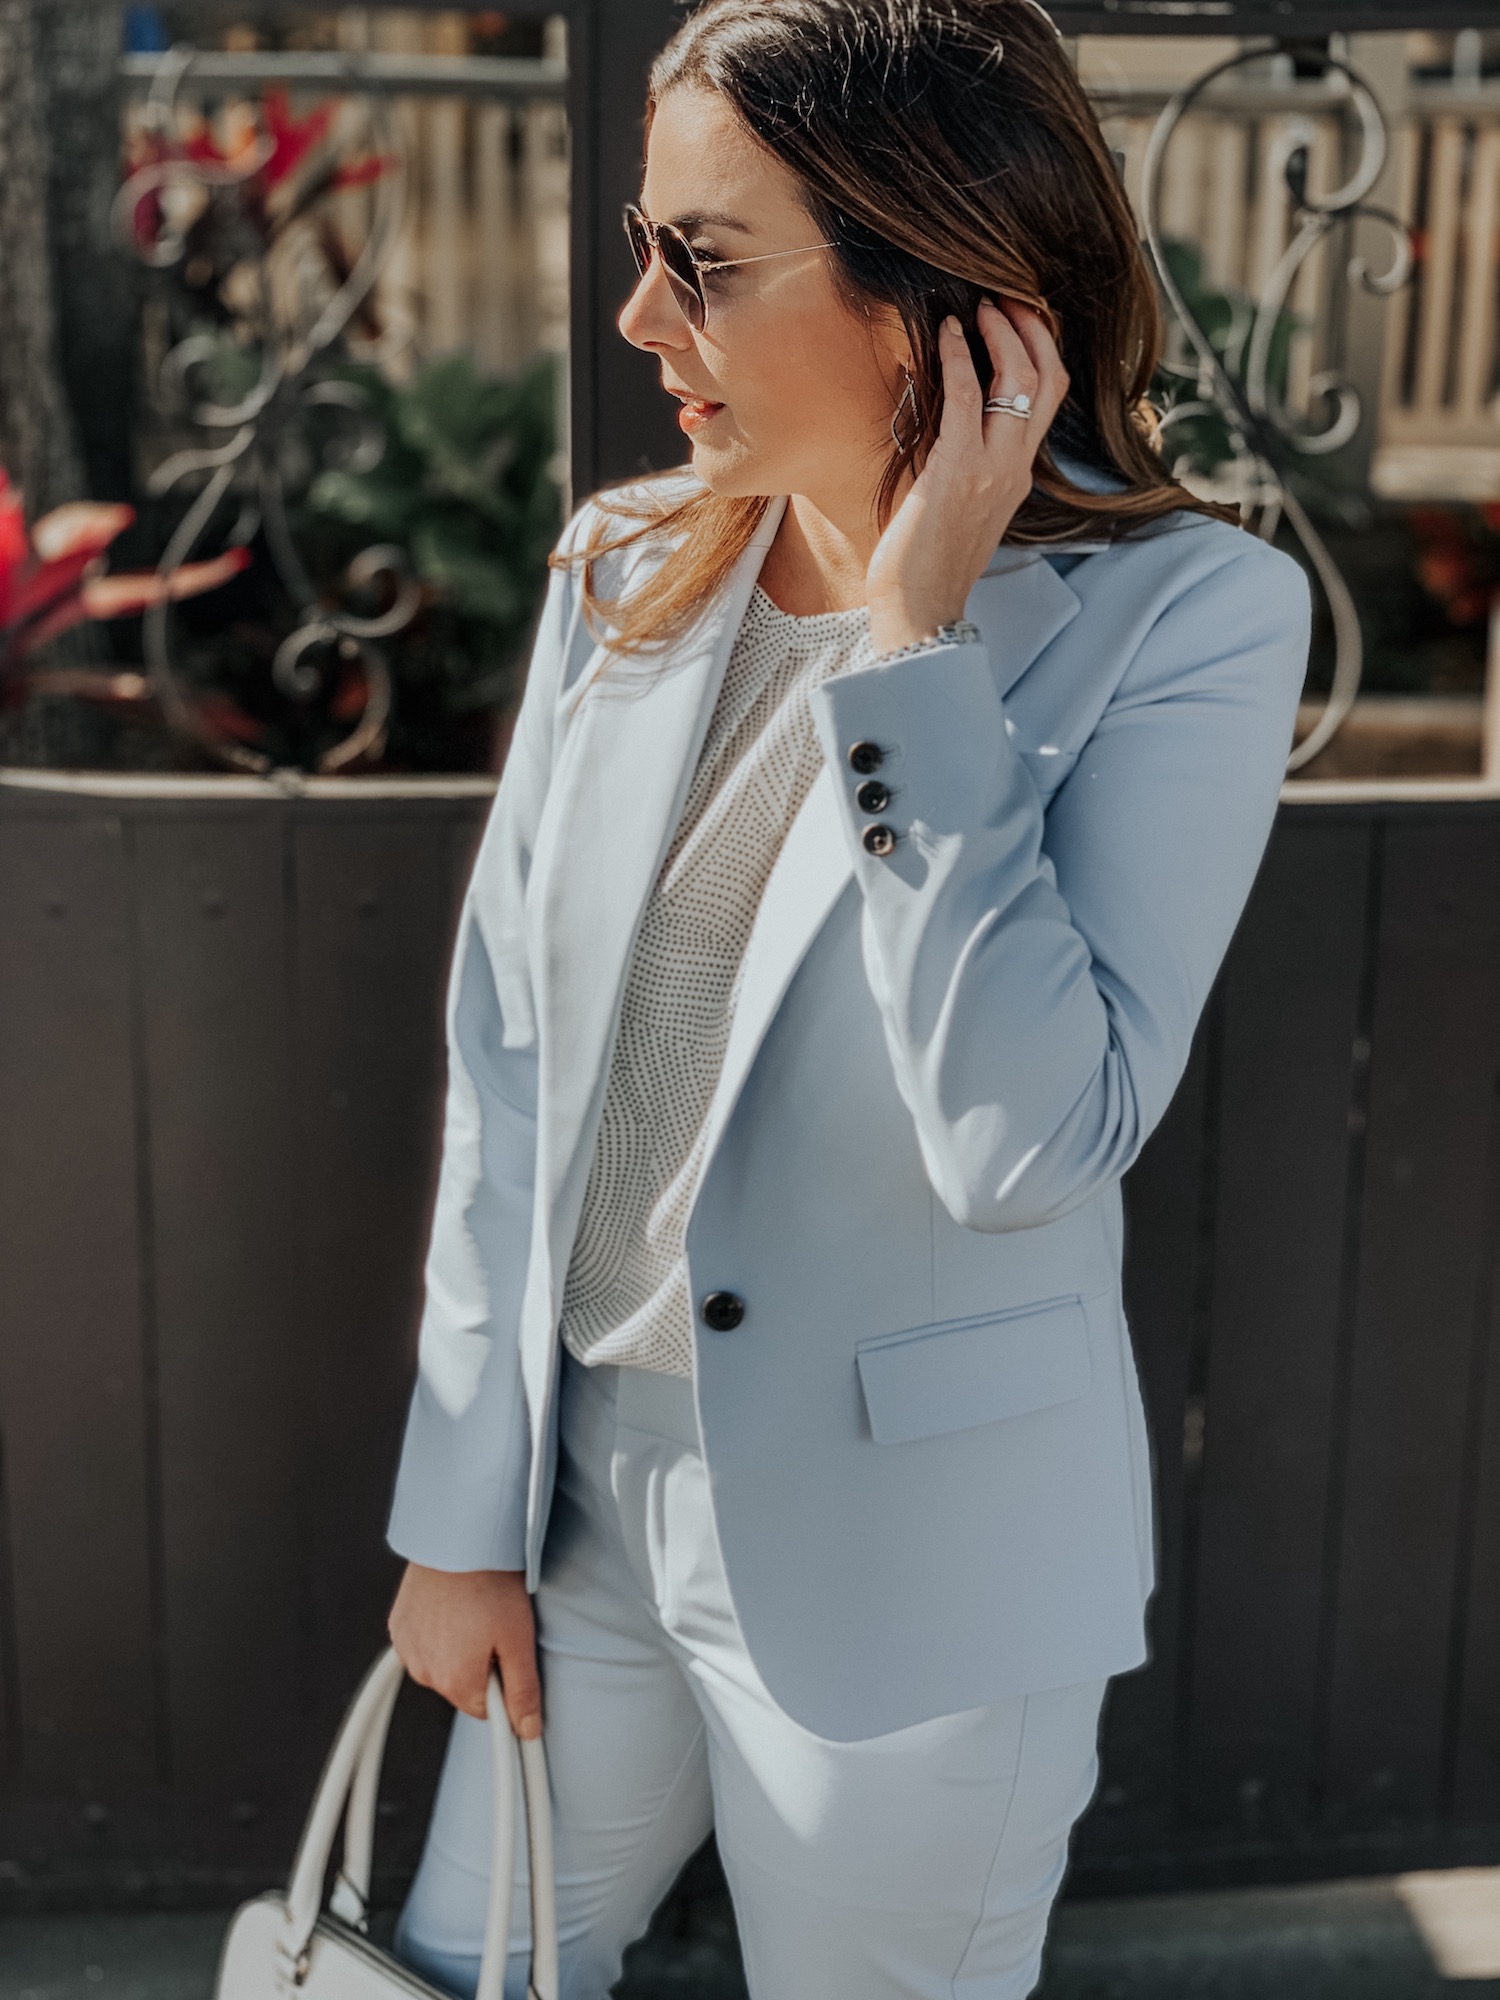 An Affordable Spring Suit from Target - Her Best Always